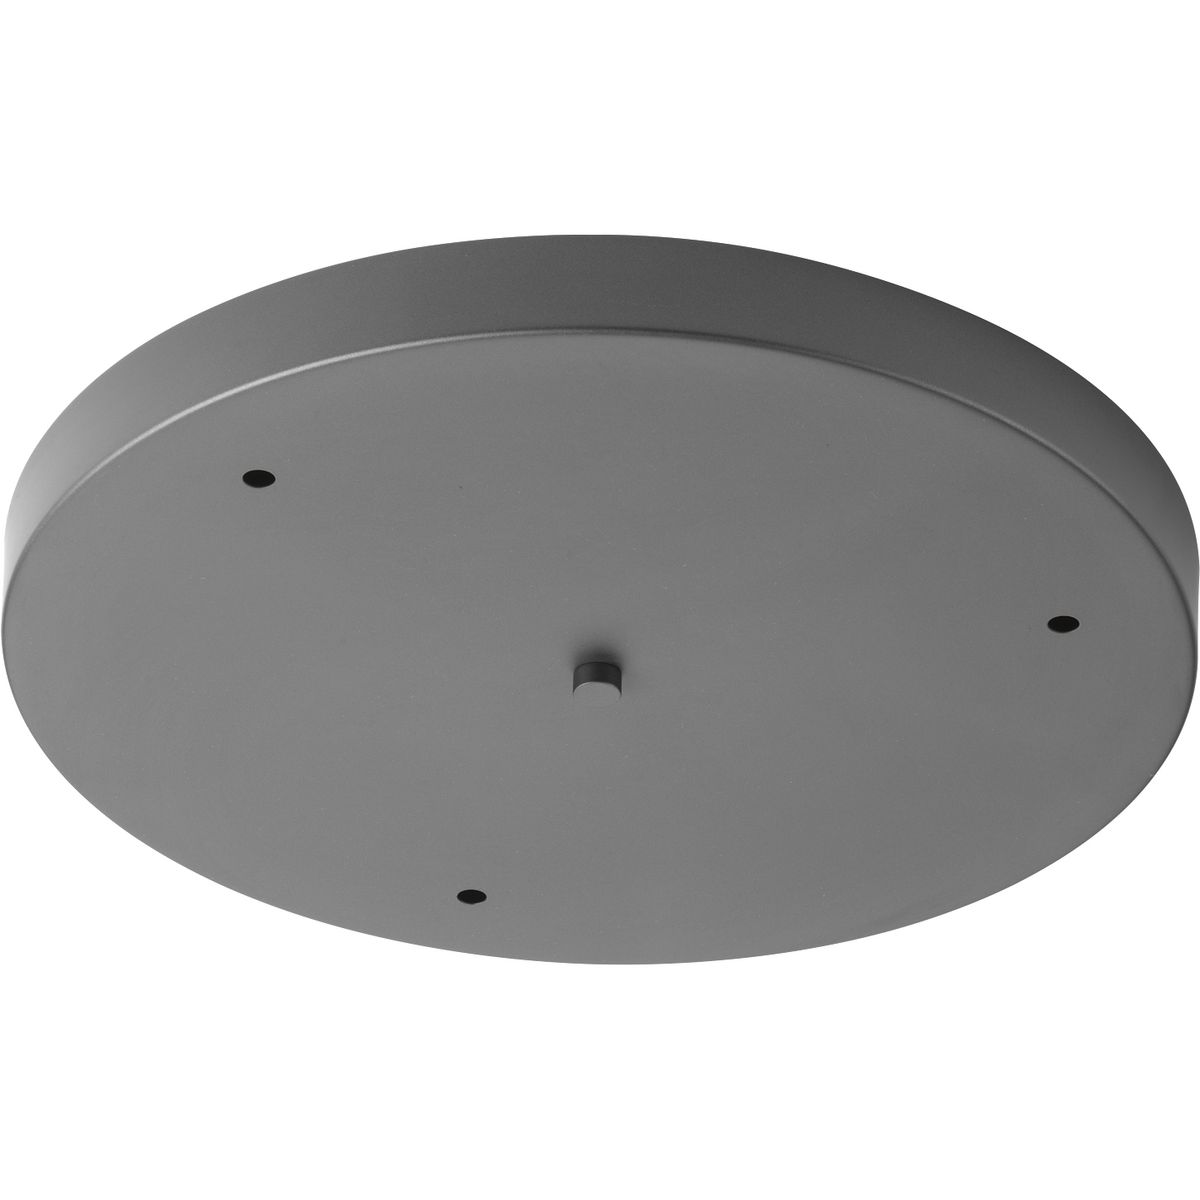 Progress Lighting's canopy accessory offers a convenient way to mount groupings of pendants. This round pendant accessory allows for the hanging of 3 pendants off of one outlet box. Pendants can be hung straight or staggered. The maximum pendant width for three pendants is 9-1/2 in each.